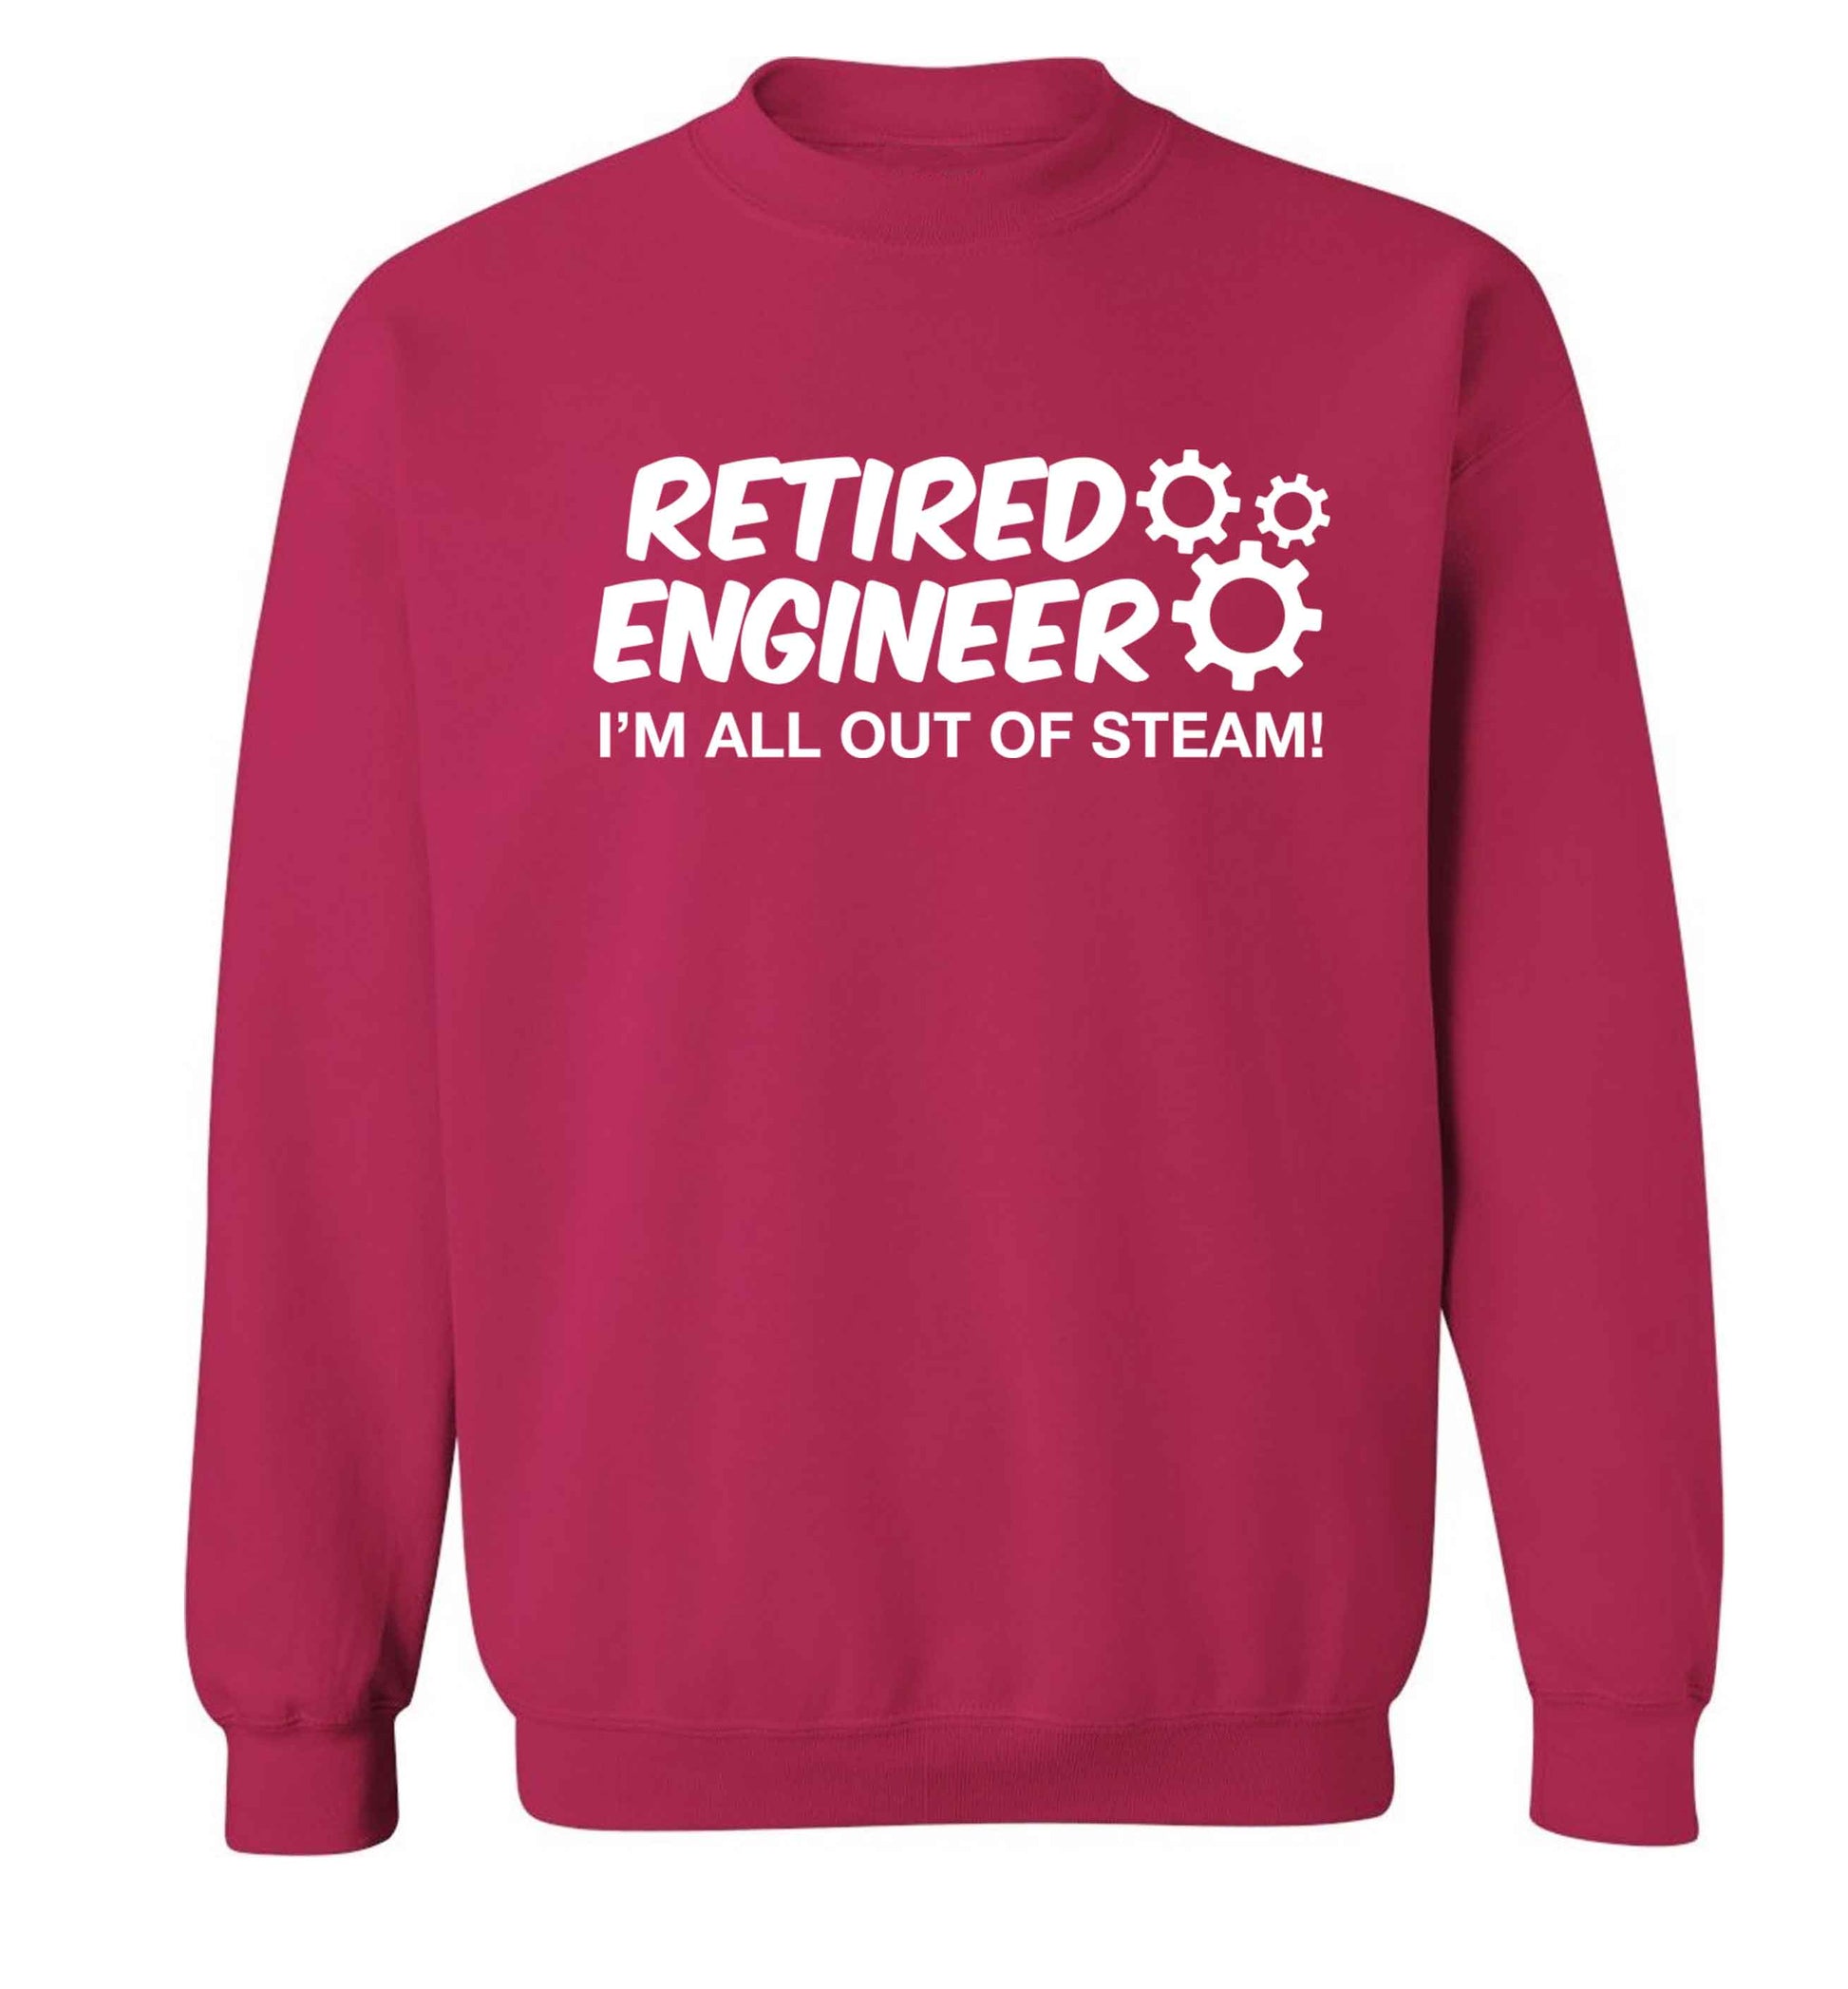 Retired engineer I'm all out of steam Adult's unisex pink Sweater 2XL